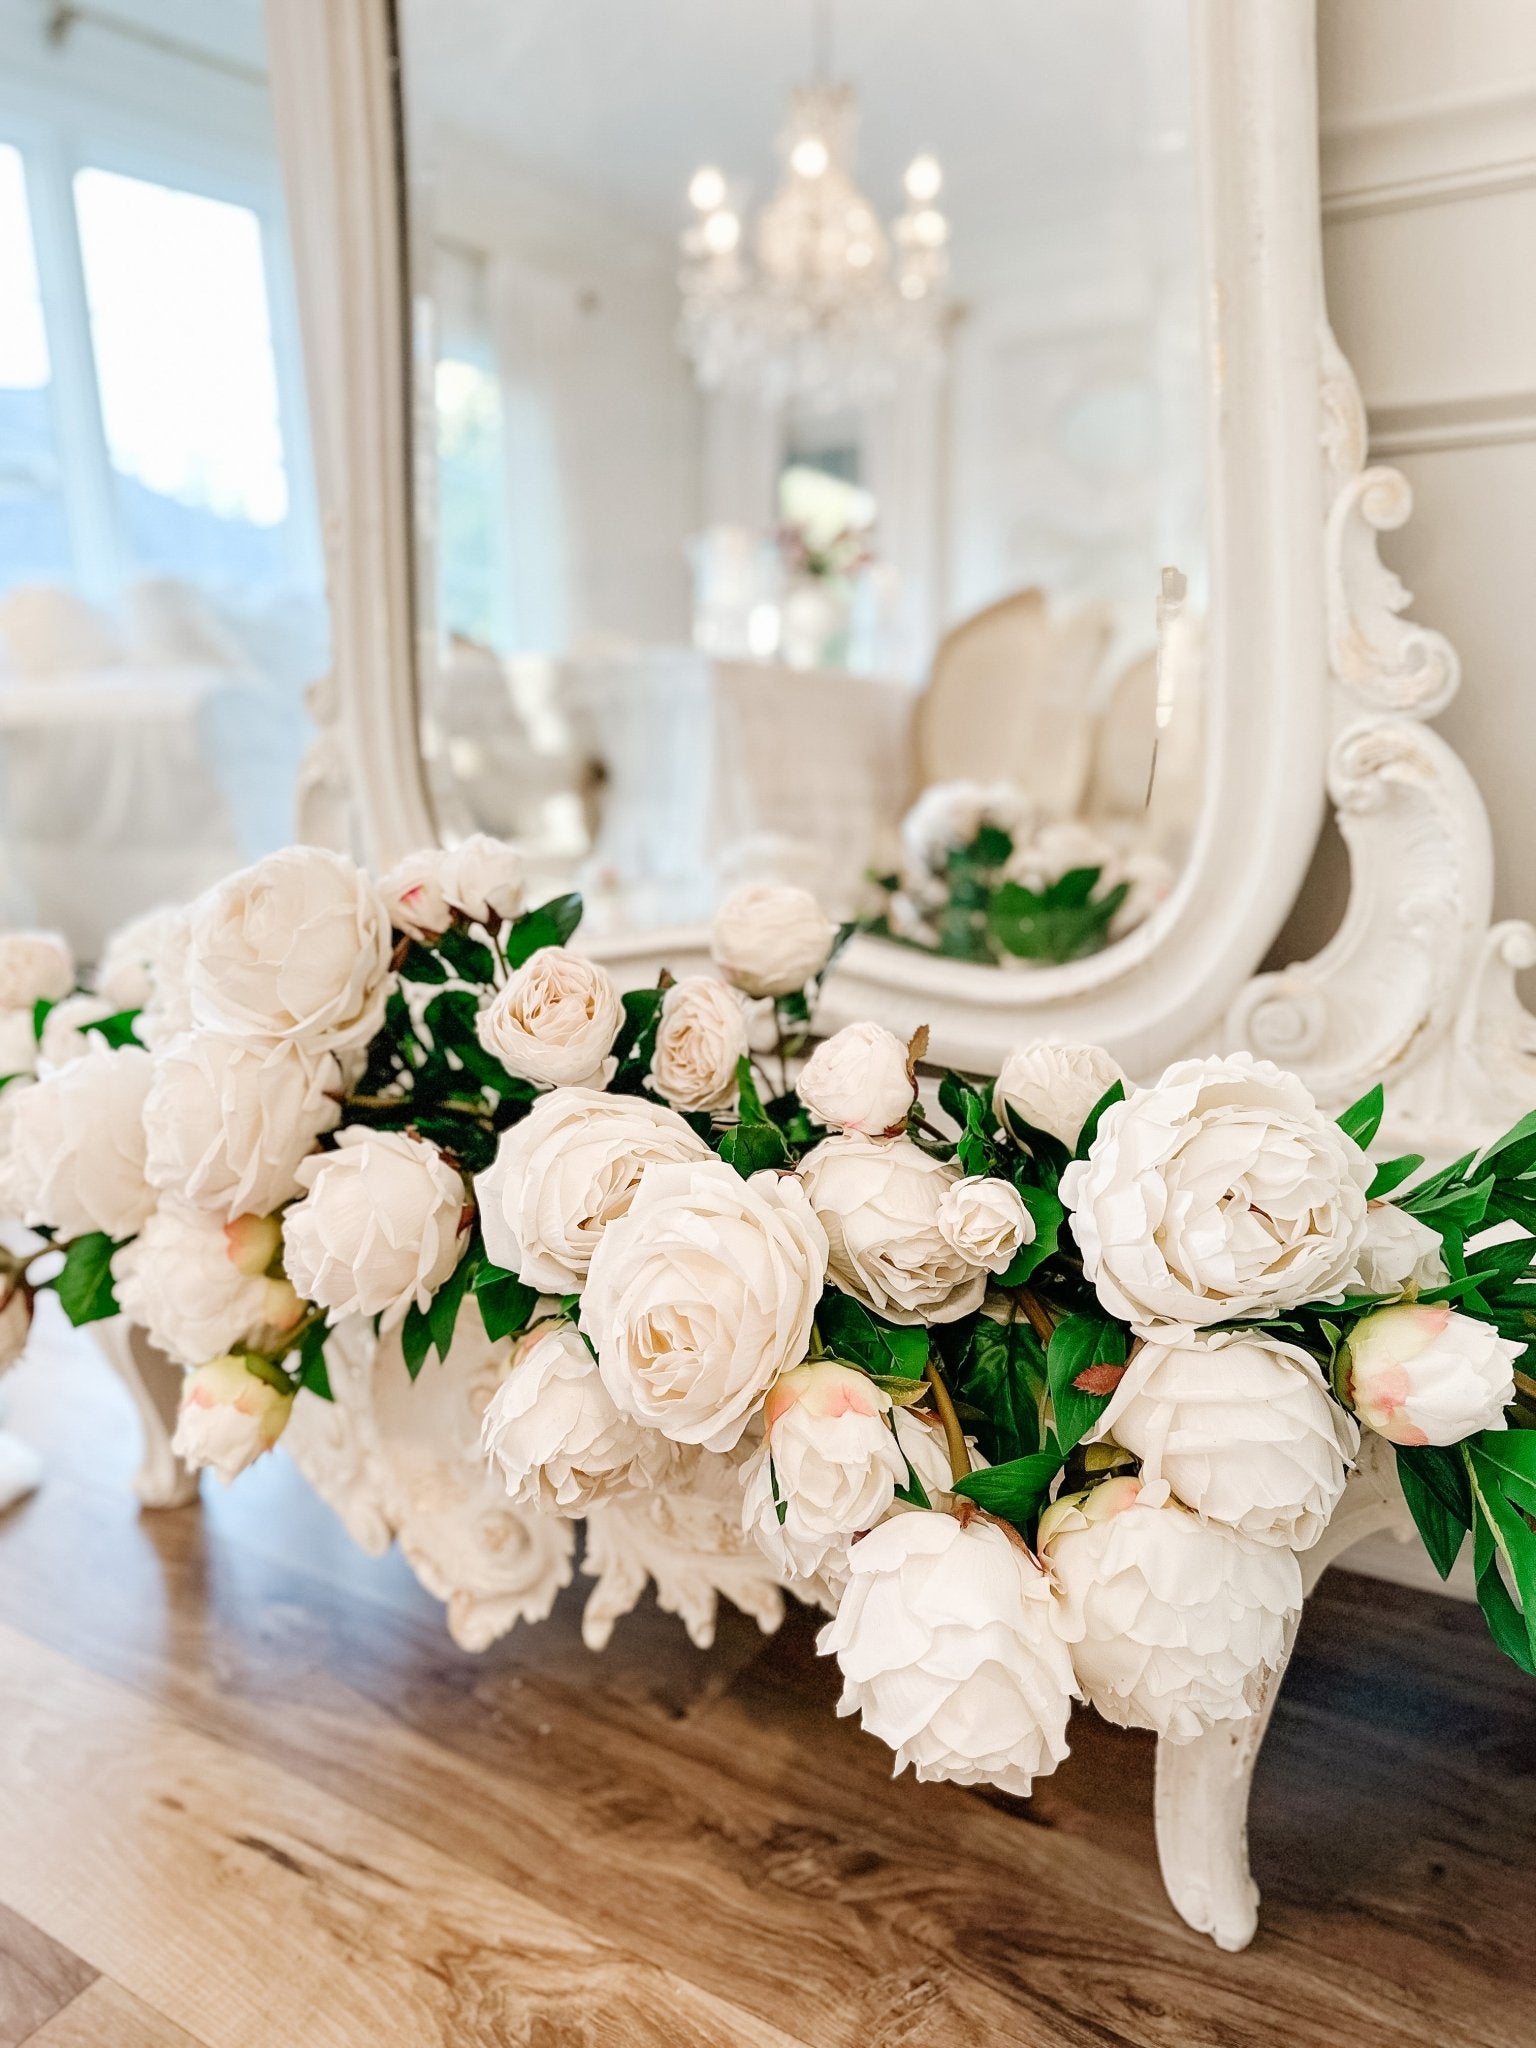 Faux Flowers vs Real Touch Florals - Which is Perfect for Your Home? - Ivory Lane Home